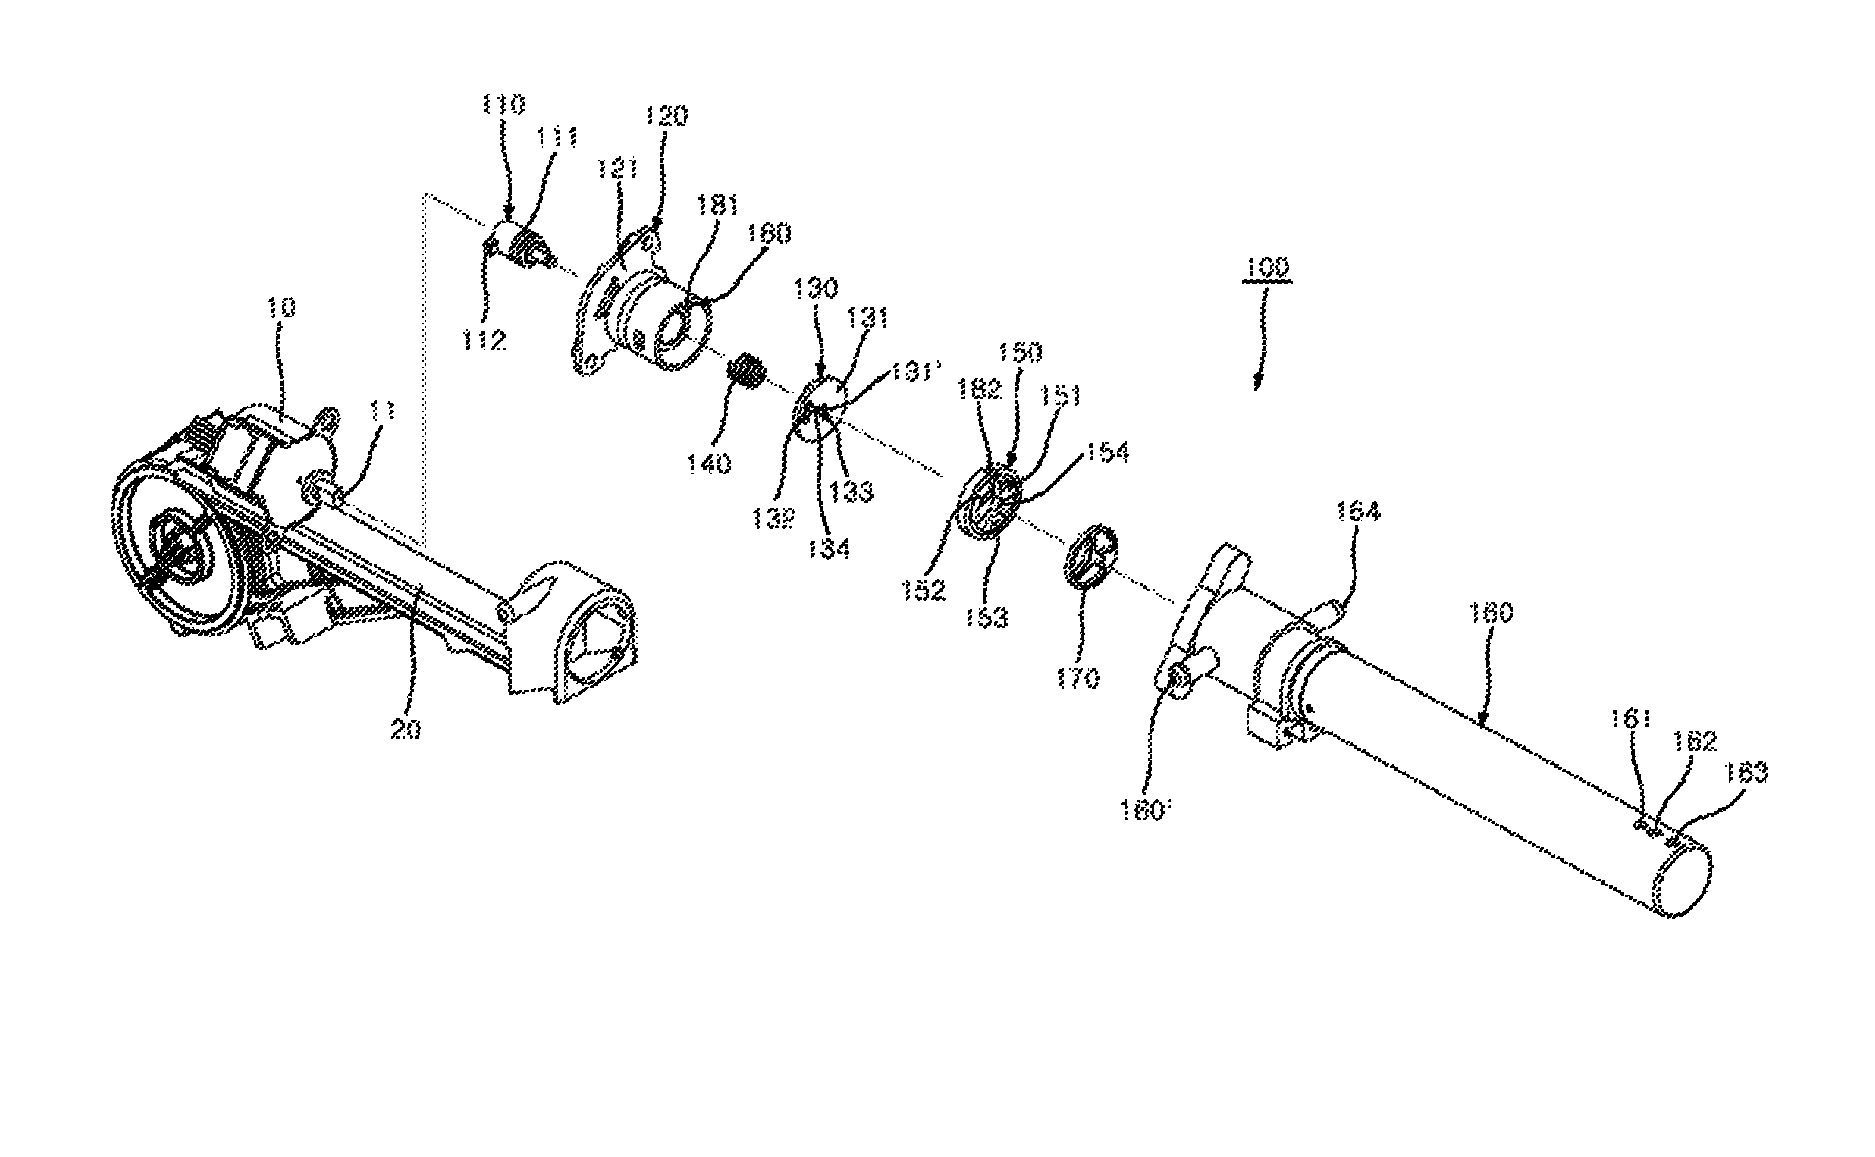 Flow channel switching apparatus for bidet nozzle